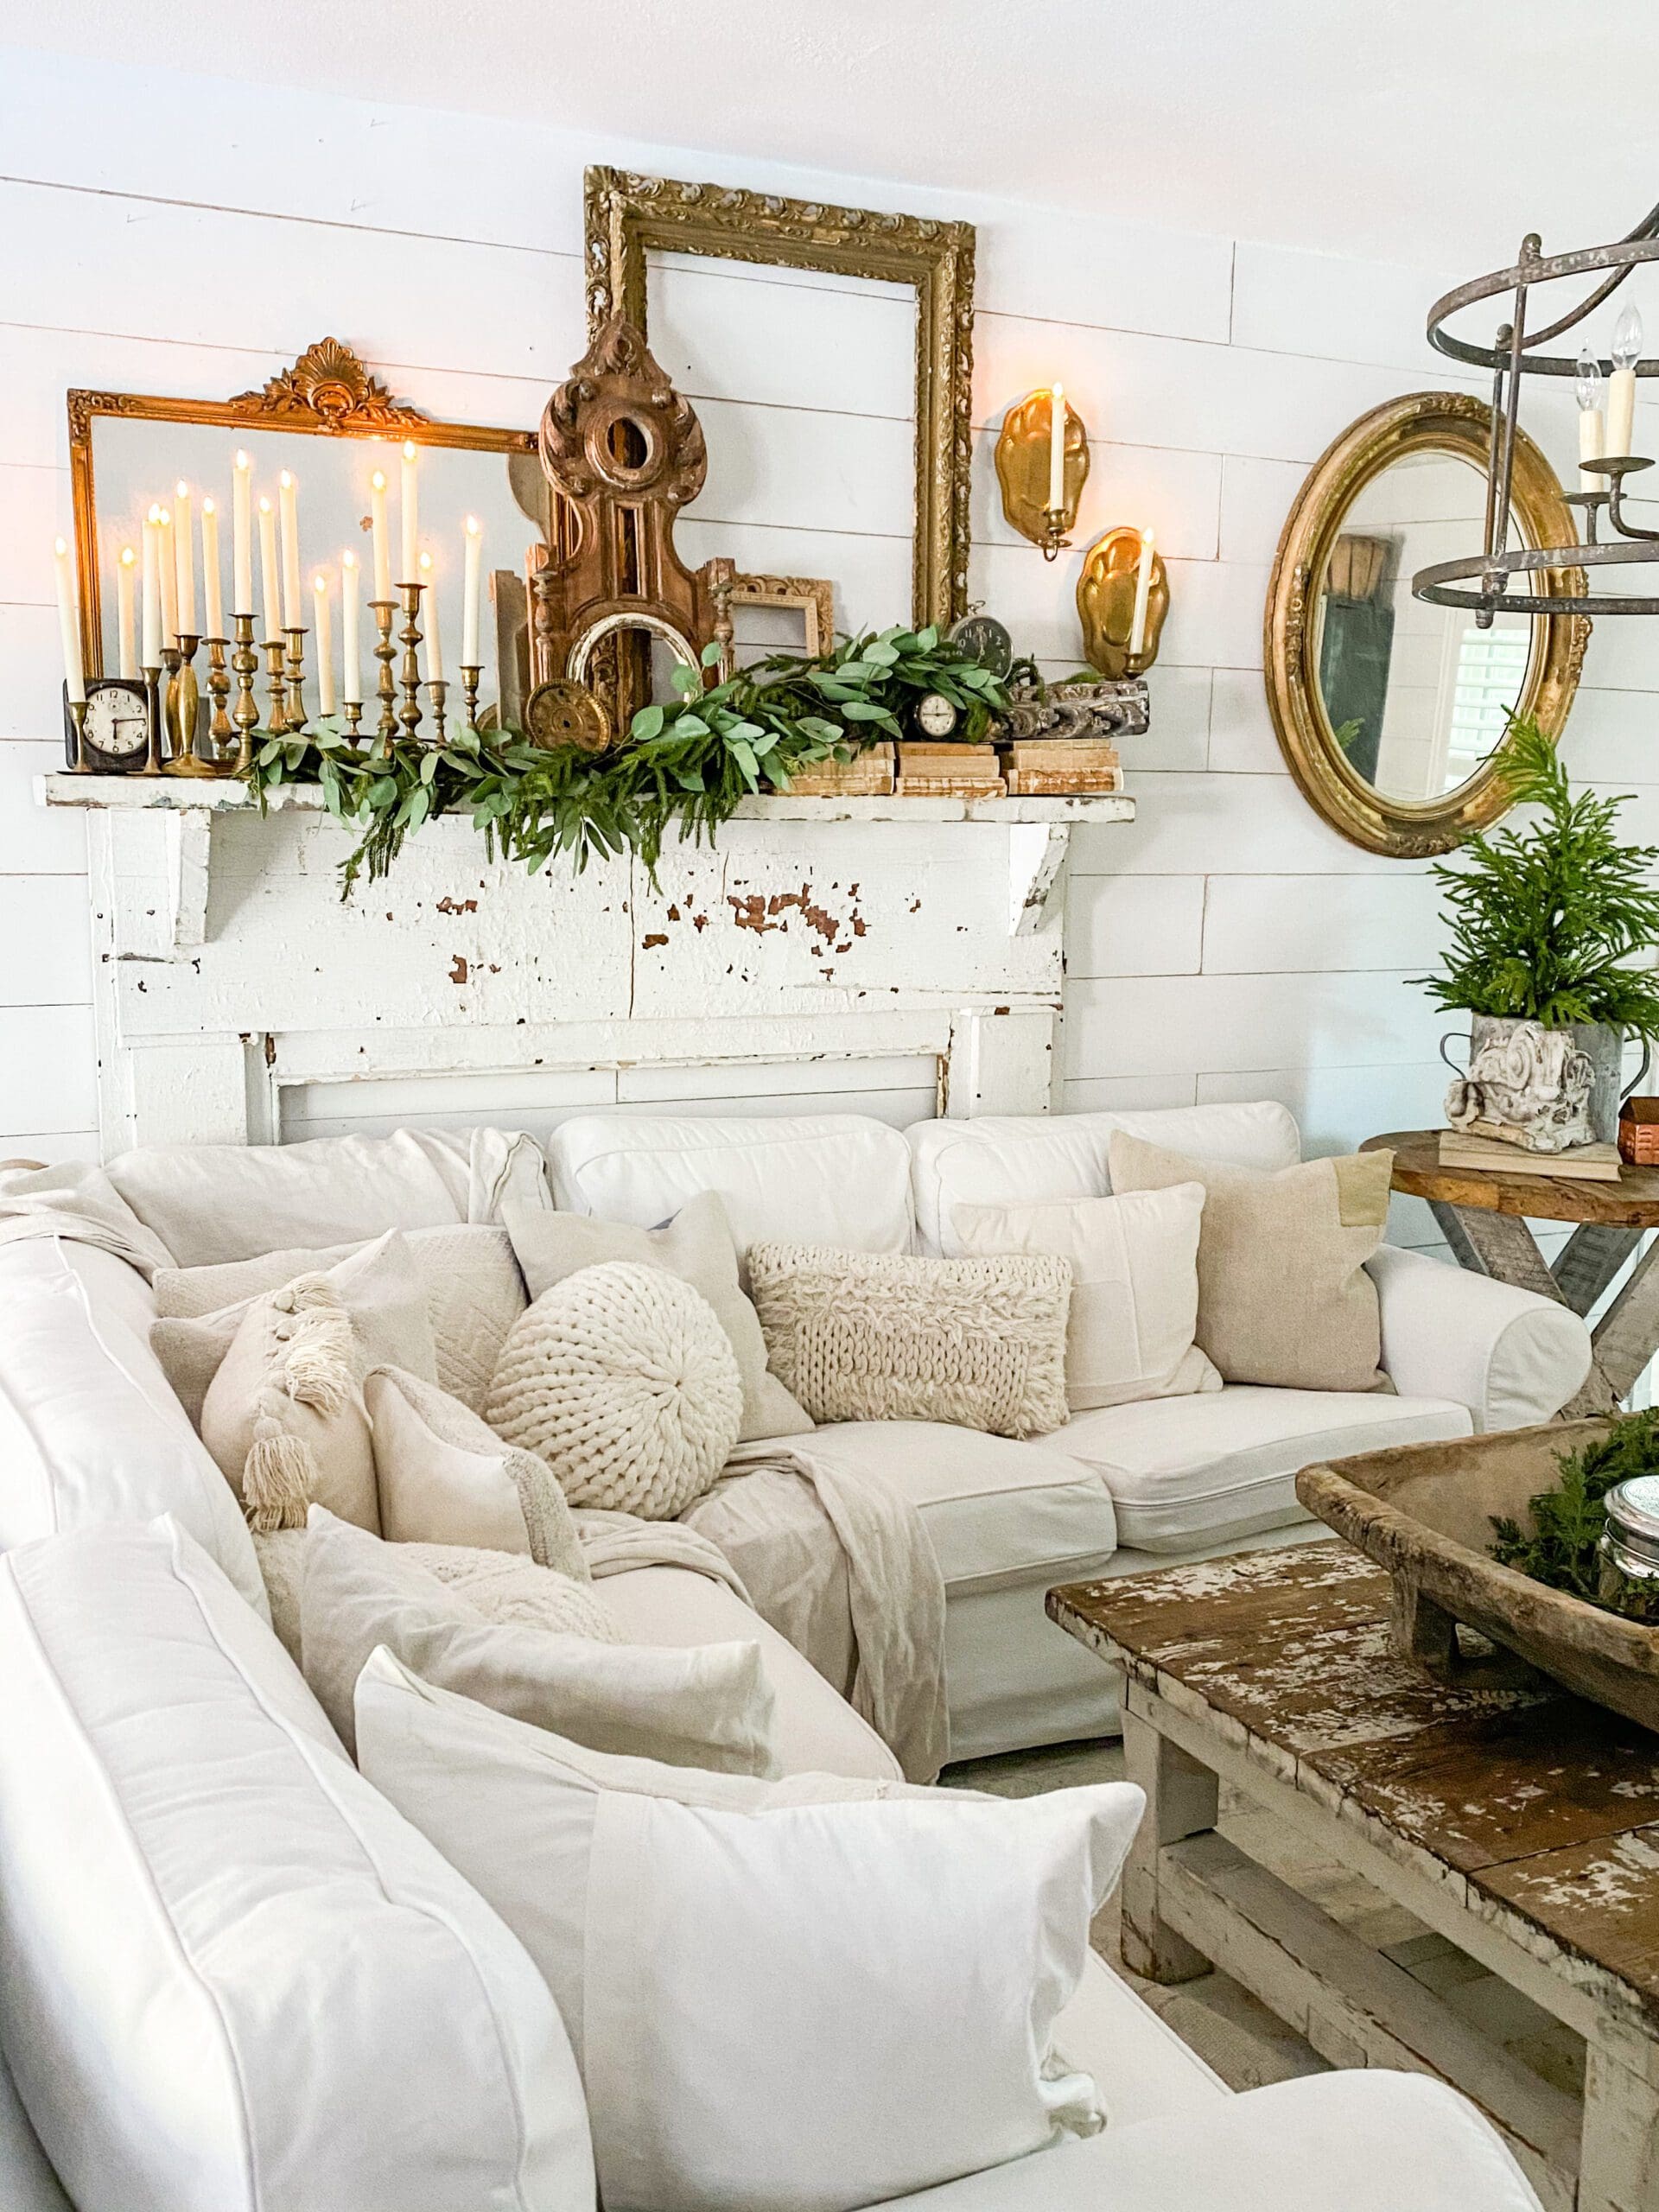 wide angle of a cozy white couch in front of a white wooden mantel styled for winter